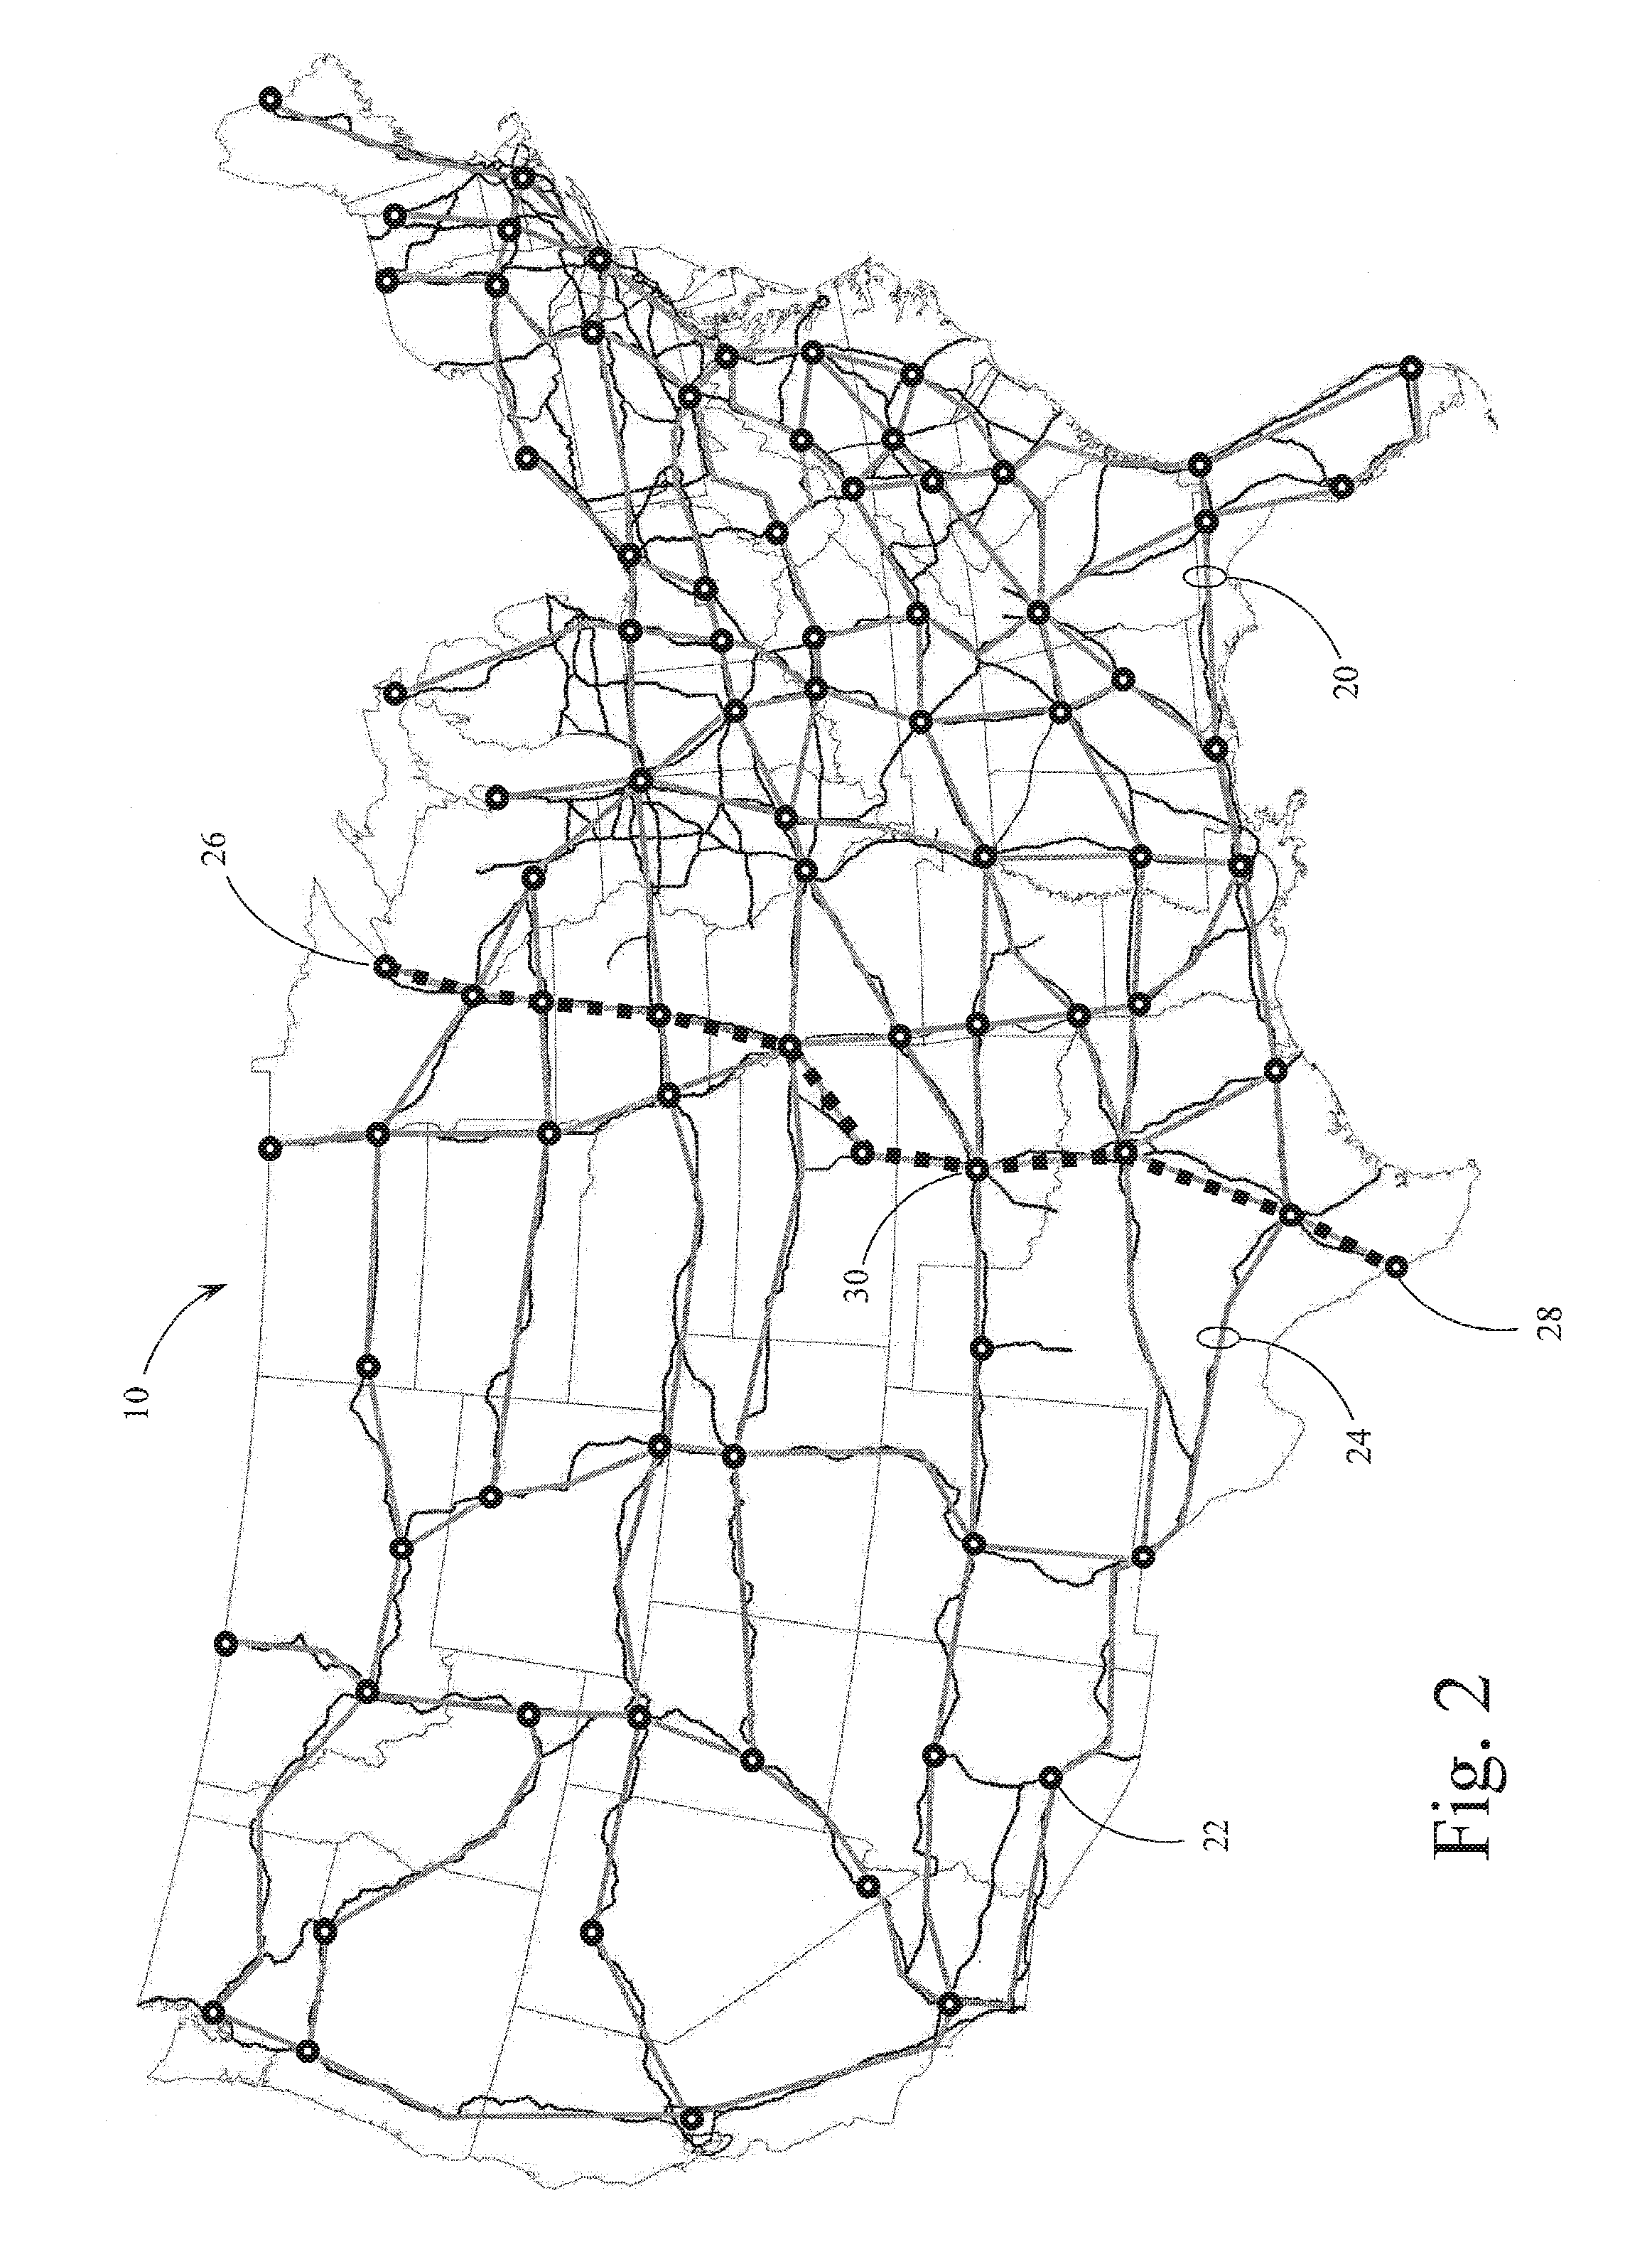 Large Area Water Redistribution Network